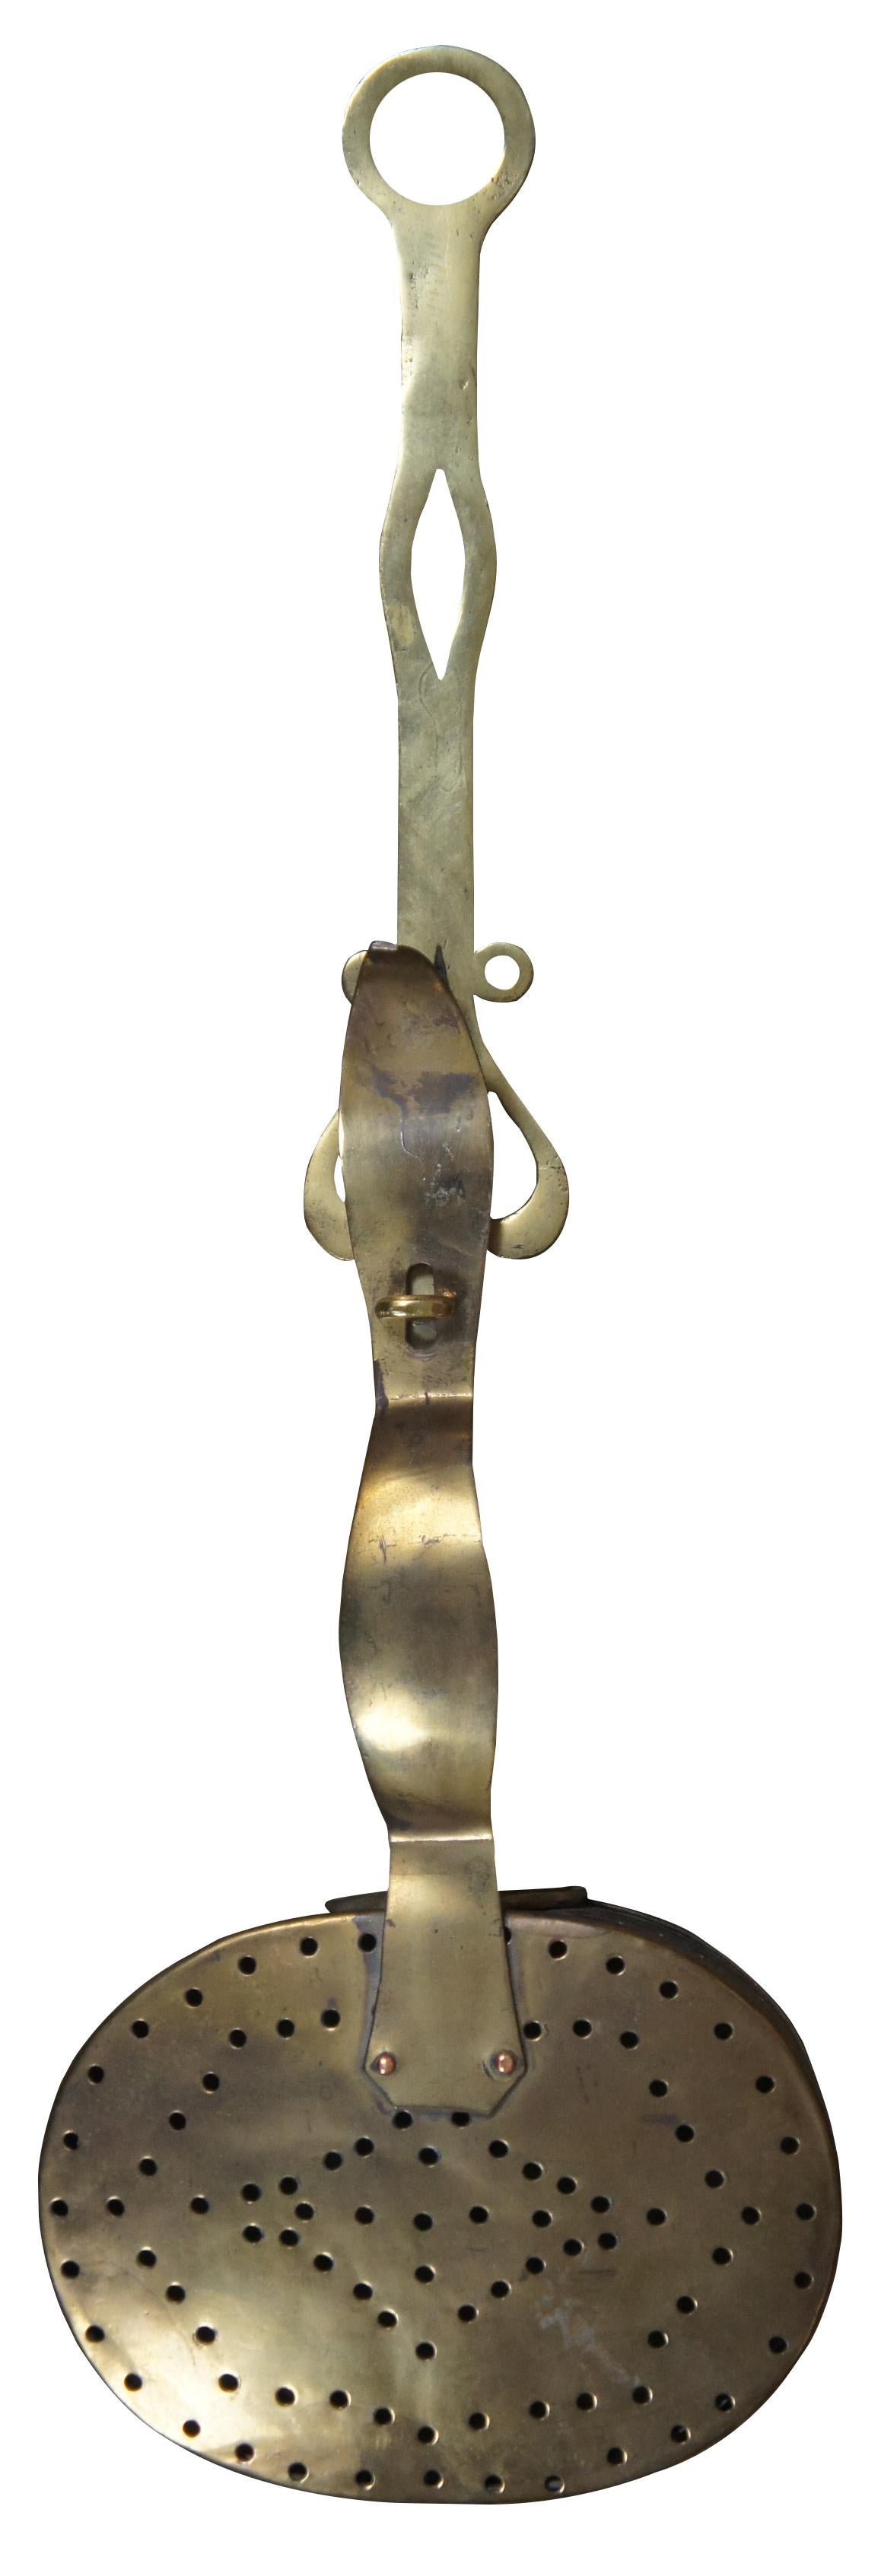 Antique Victorian Pierced Brass chestnut roasting pan.  Ornately designed with a locking lid mechanism and handle for hanging.
     